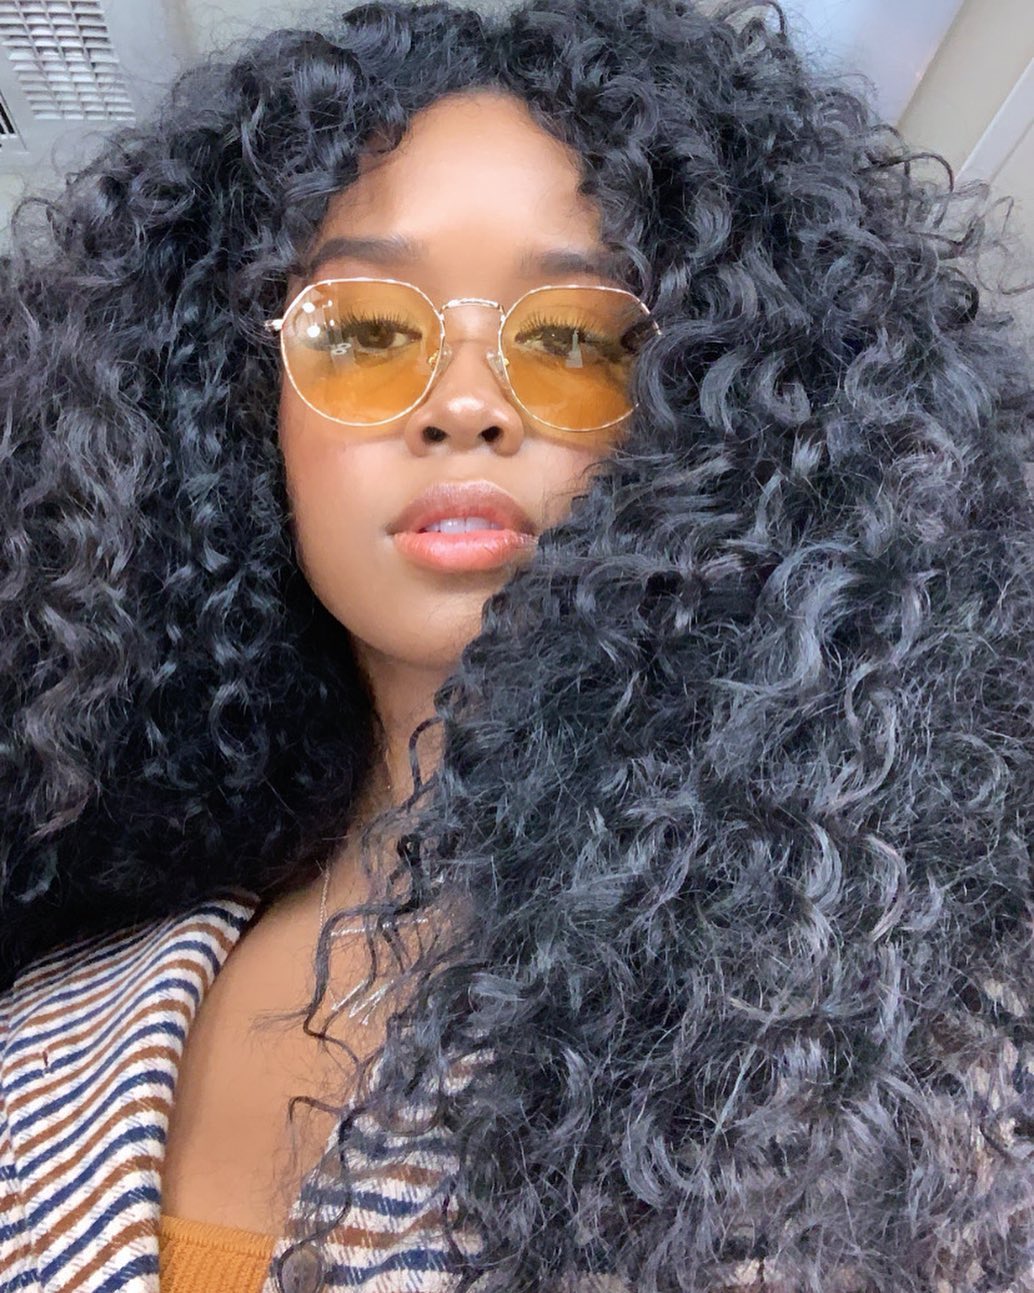 Singer H.E.R.'s Mother Surprises Her with THIS for Her Birthday!